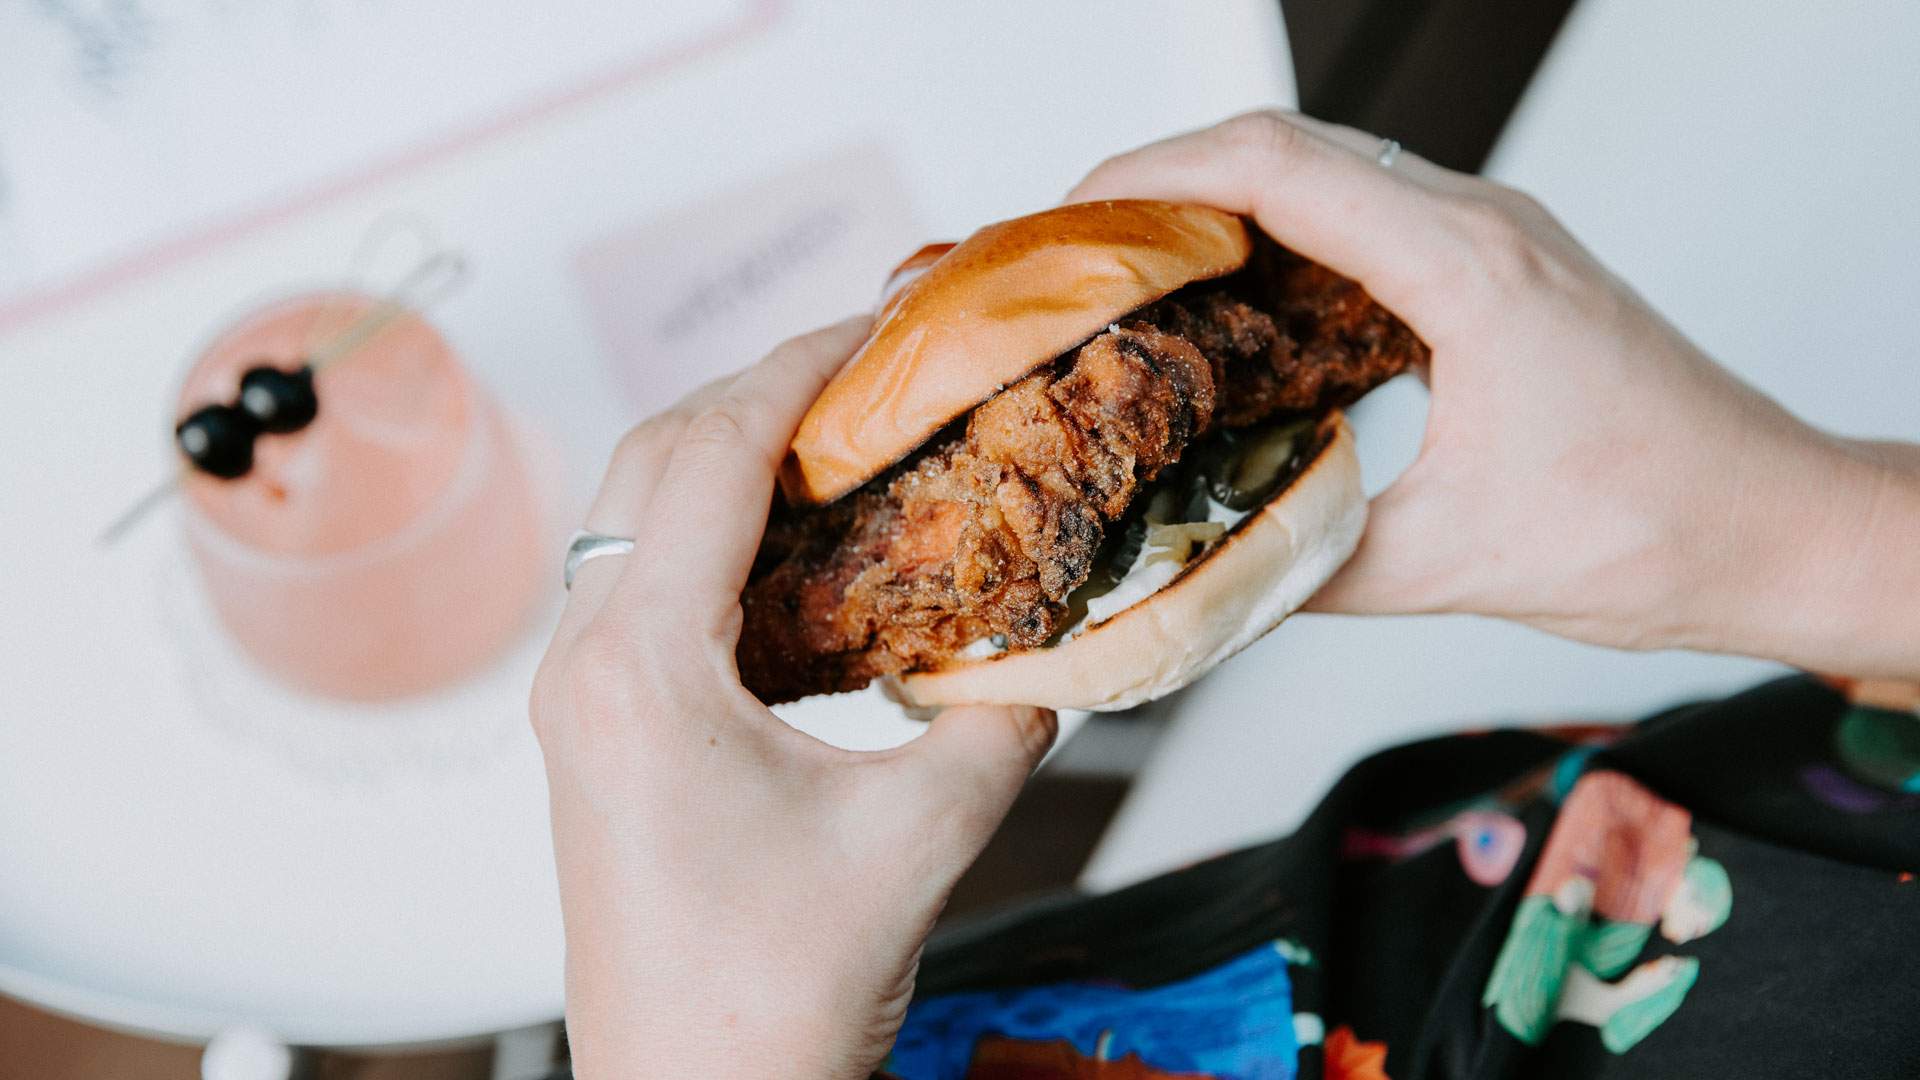 The Best Spots in Melbourne to Get a Next-Level Fried Chicken Burger